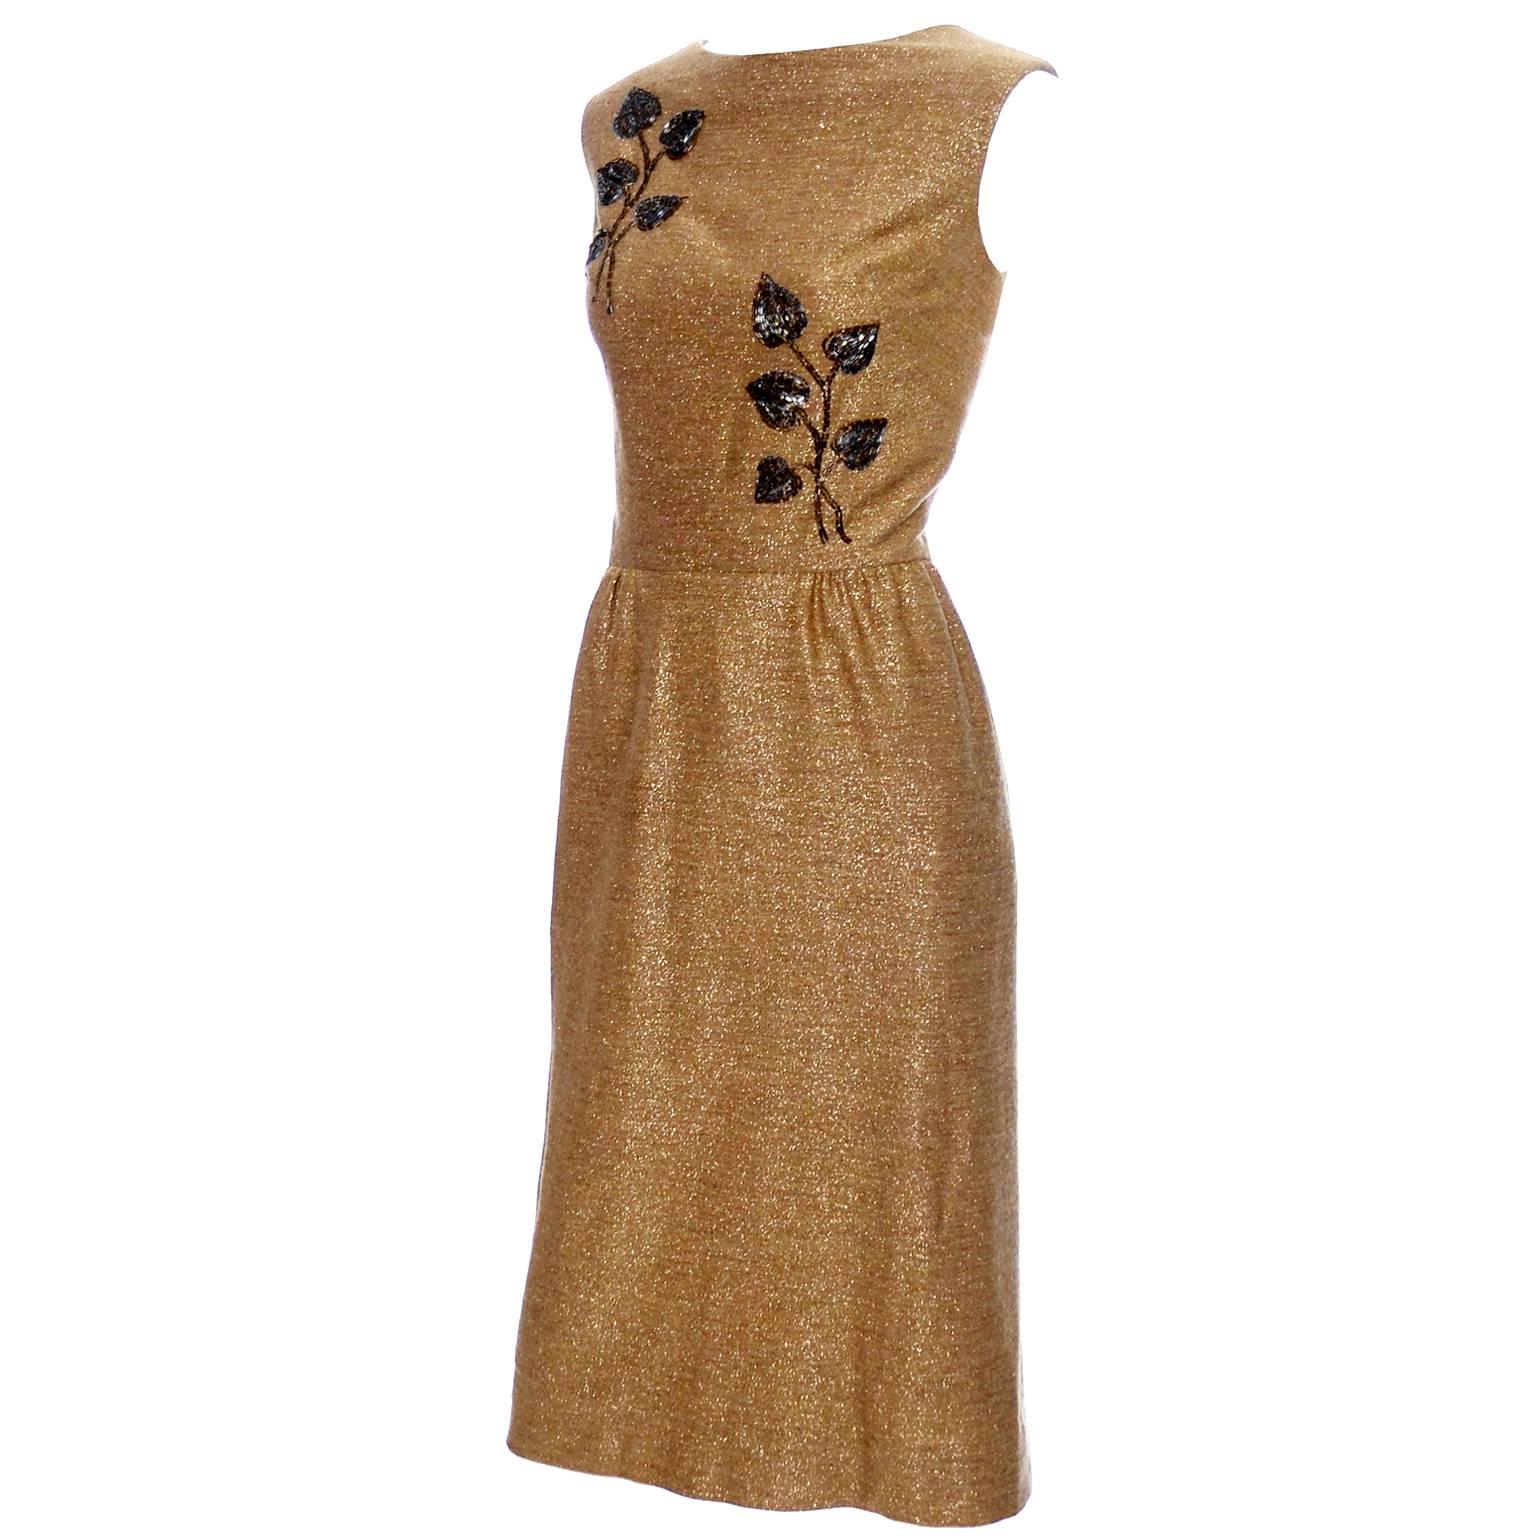 1960s Gold Metallic Carlye VIntage Sleevelss Cocktail Dress with Beaded Leaves